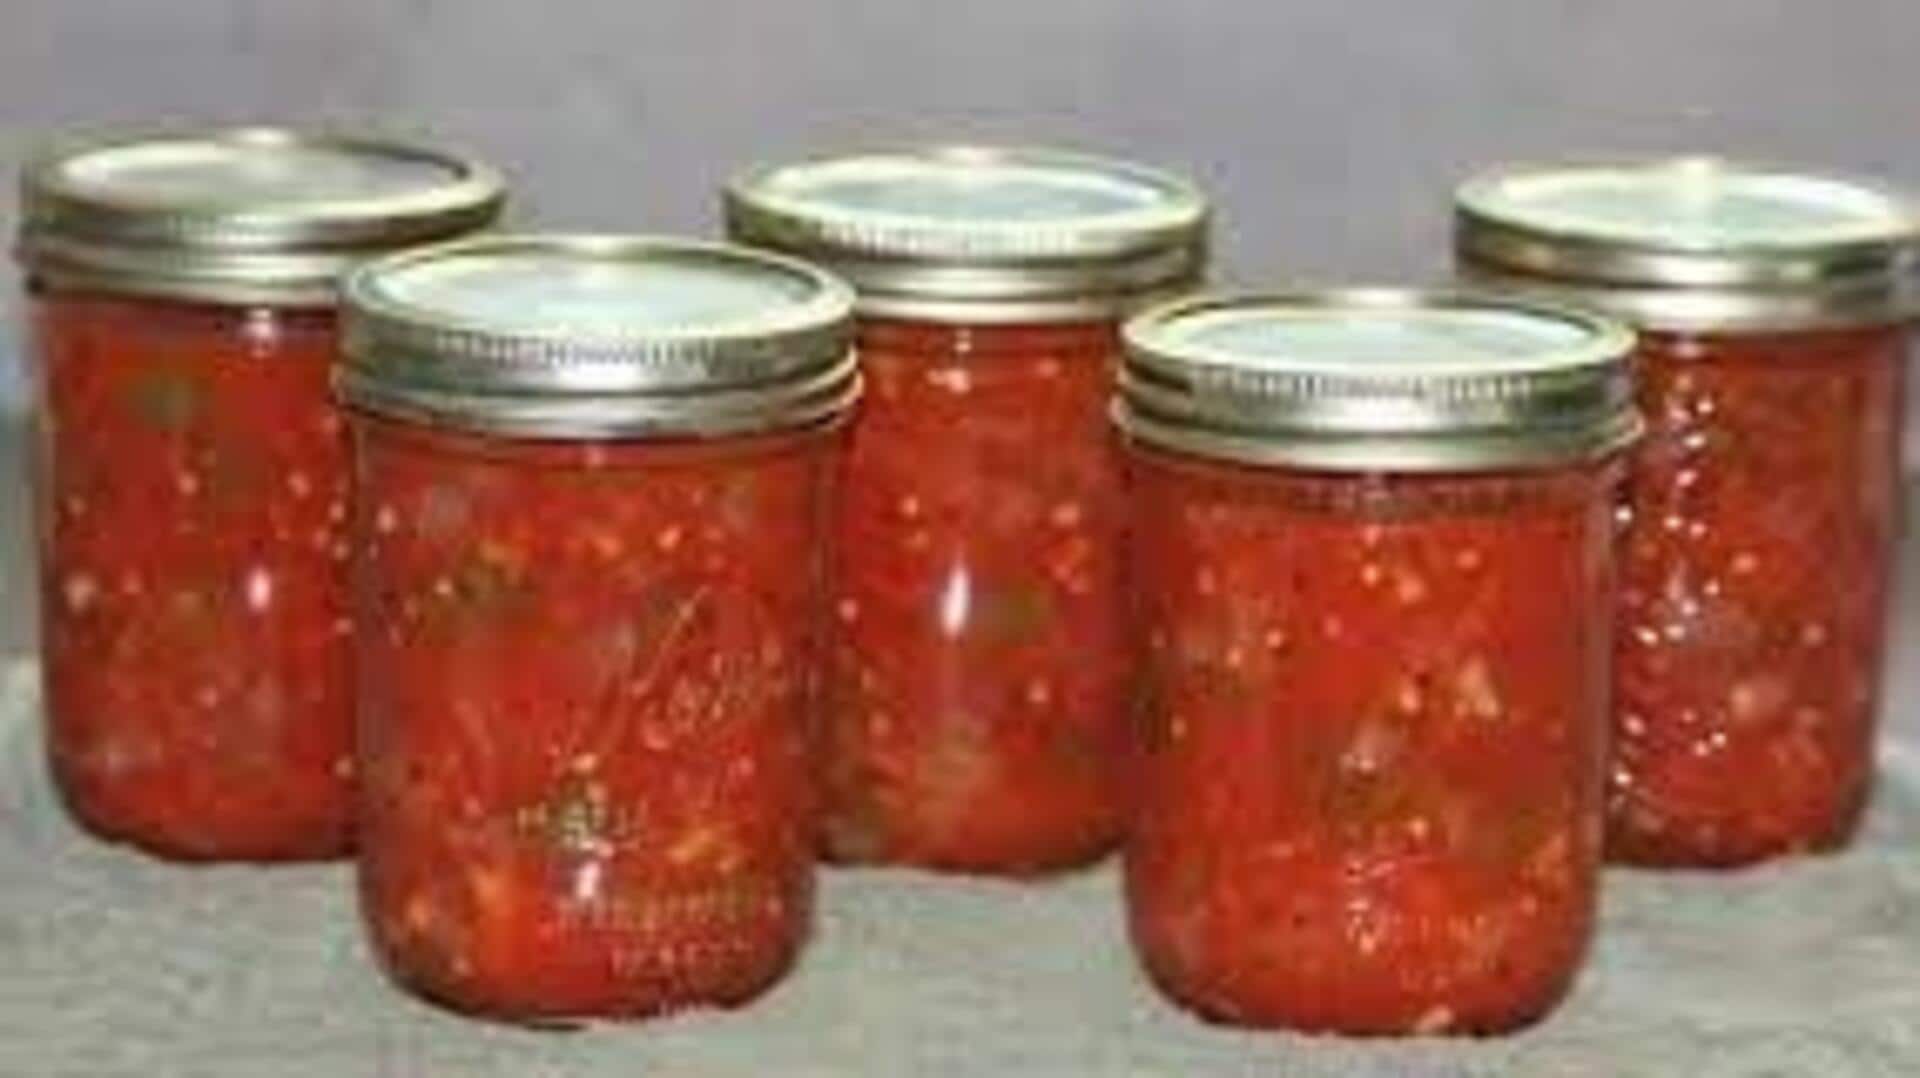 A basic guide to canned tomatoes